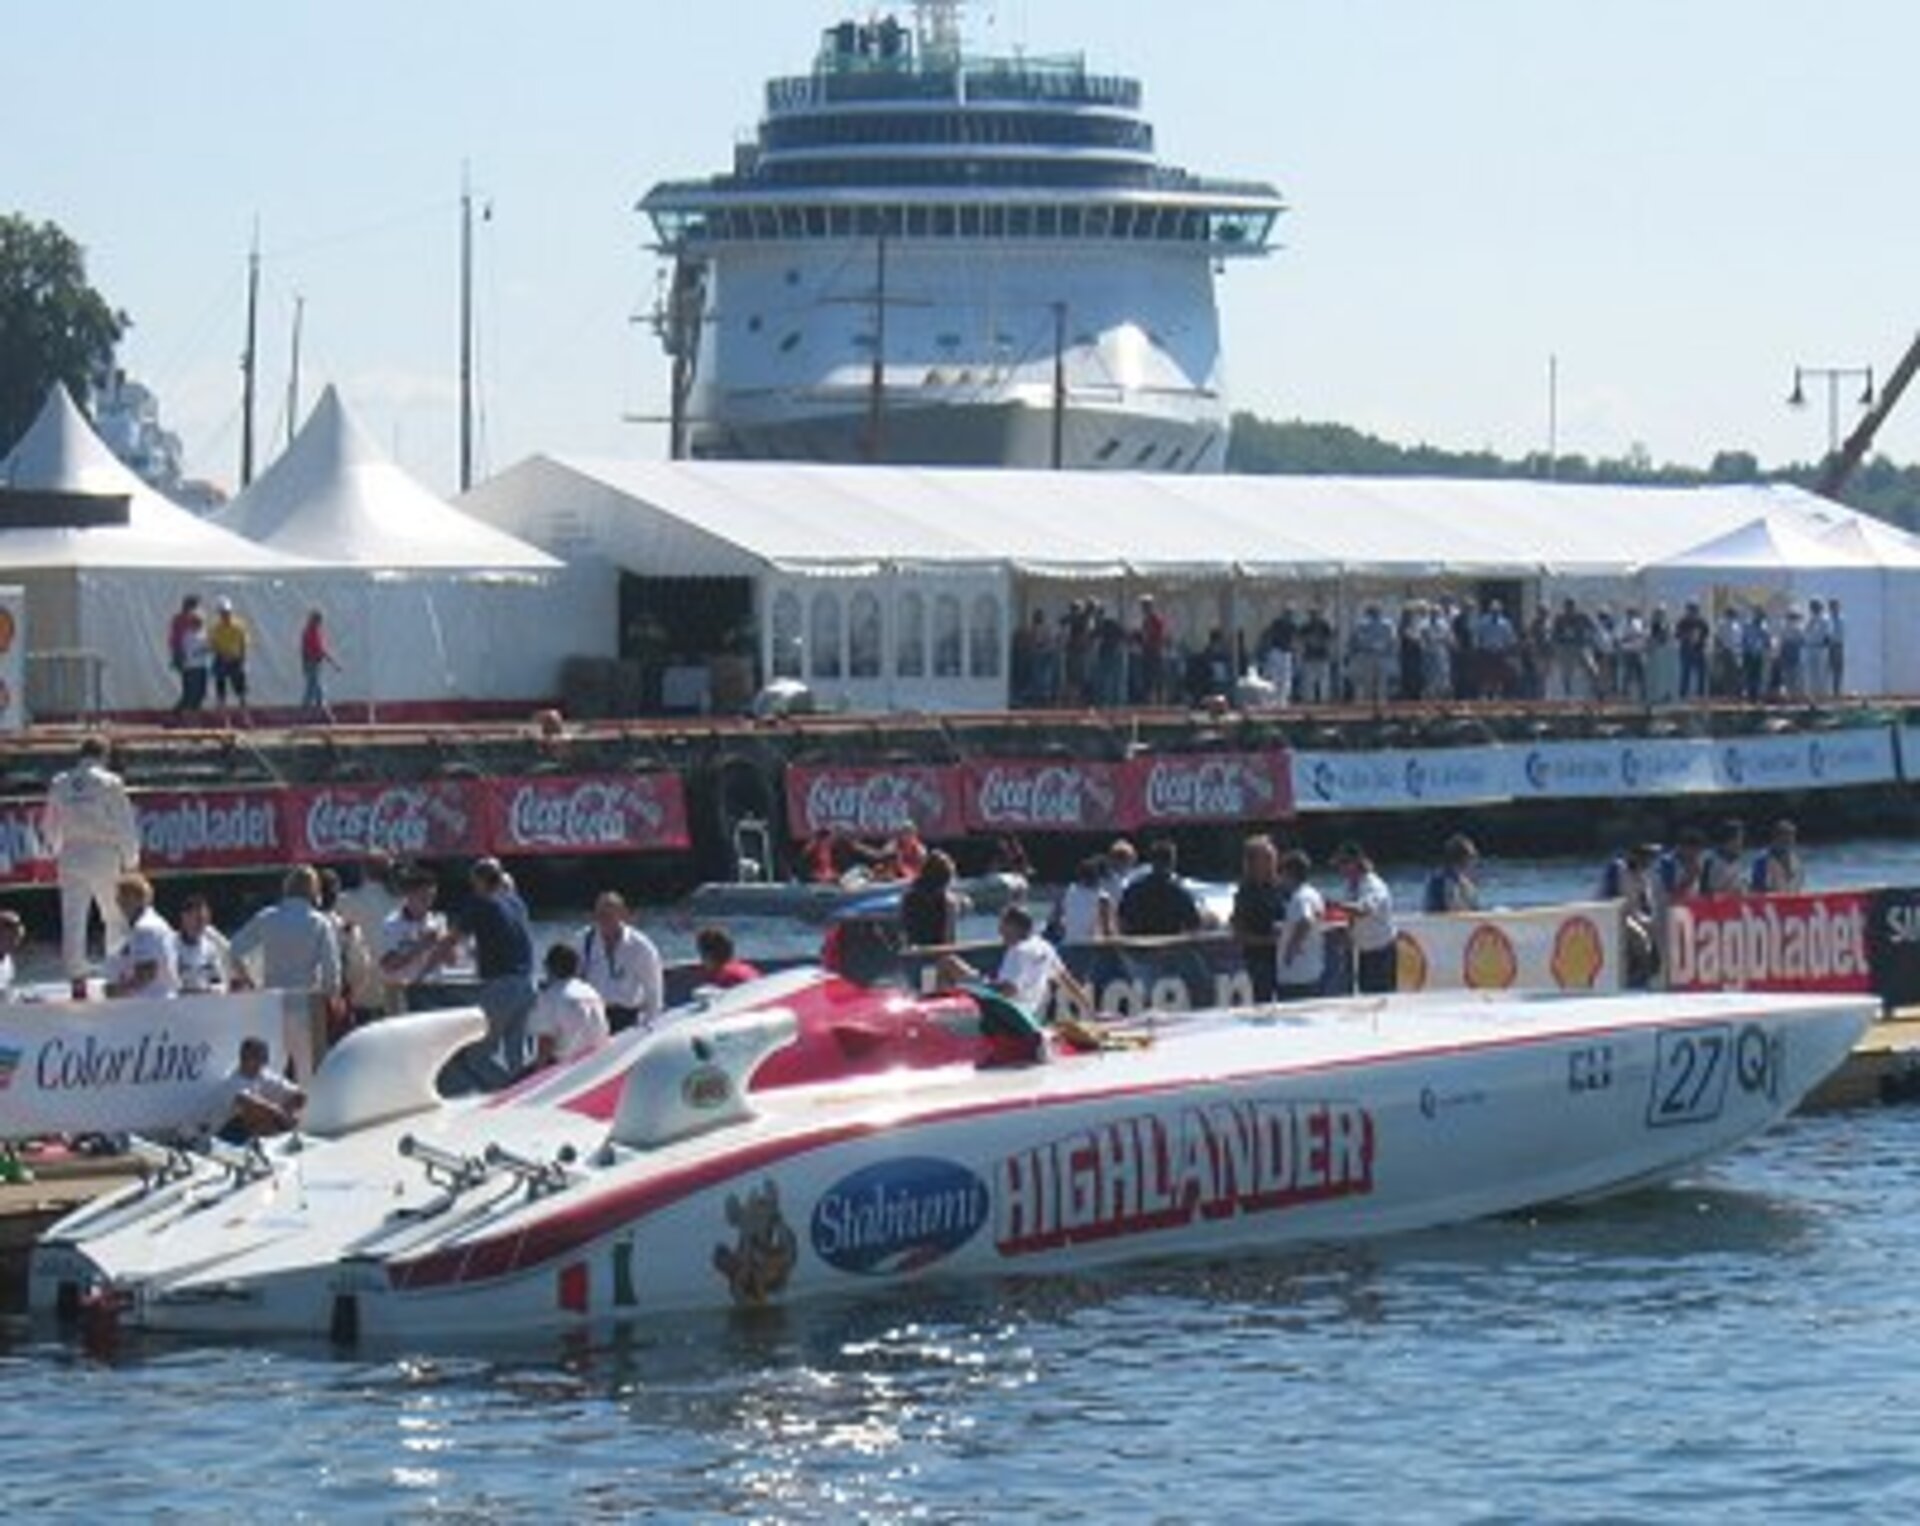 The power boats attracted a large crowd at Akke Brygge